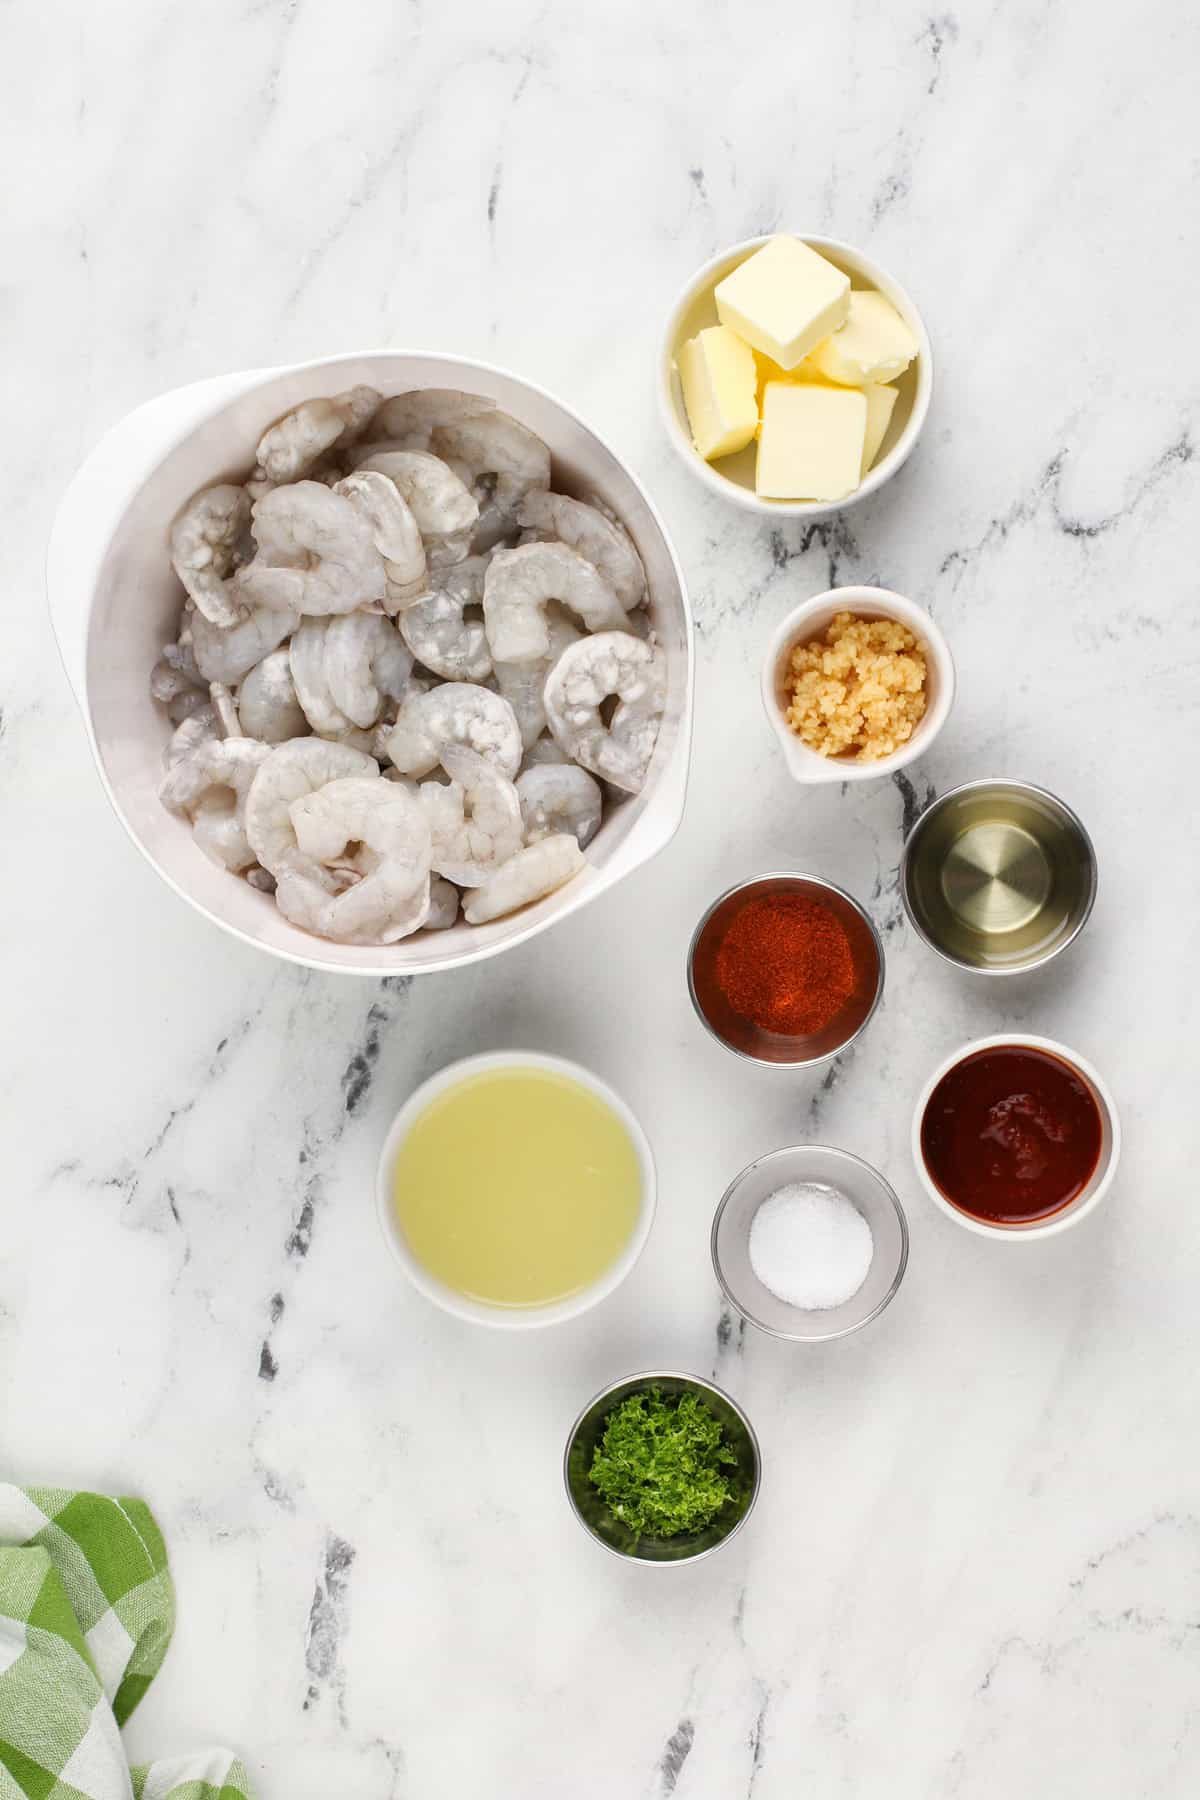 Marinated shrimp taco ingredients arranged on a marble countertop.